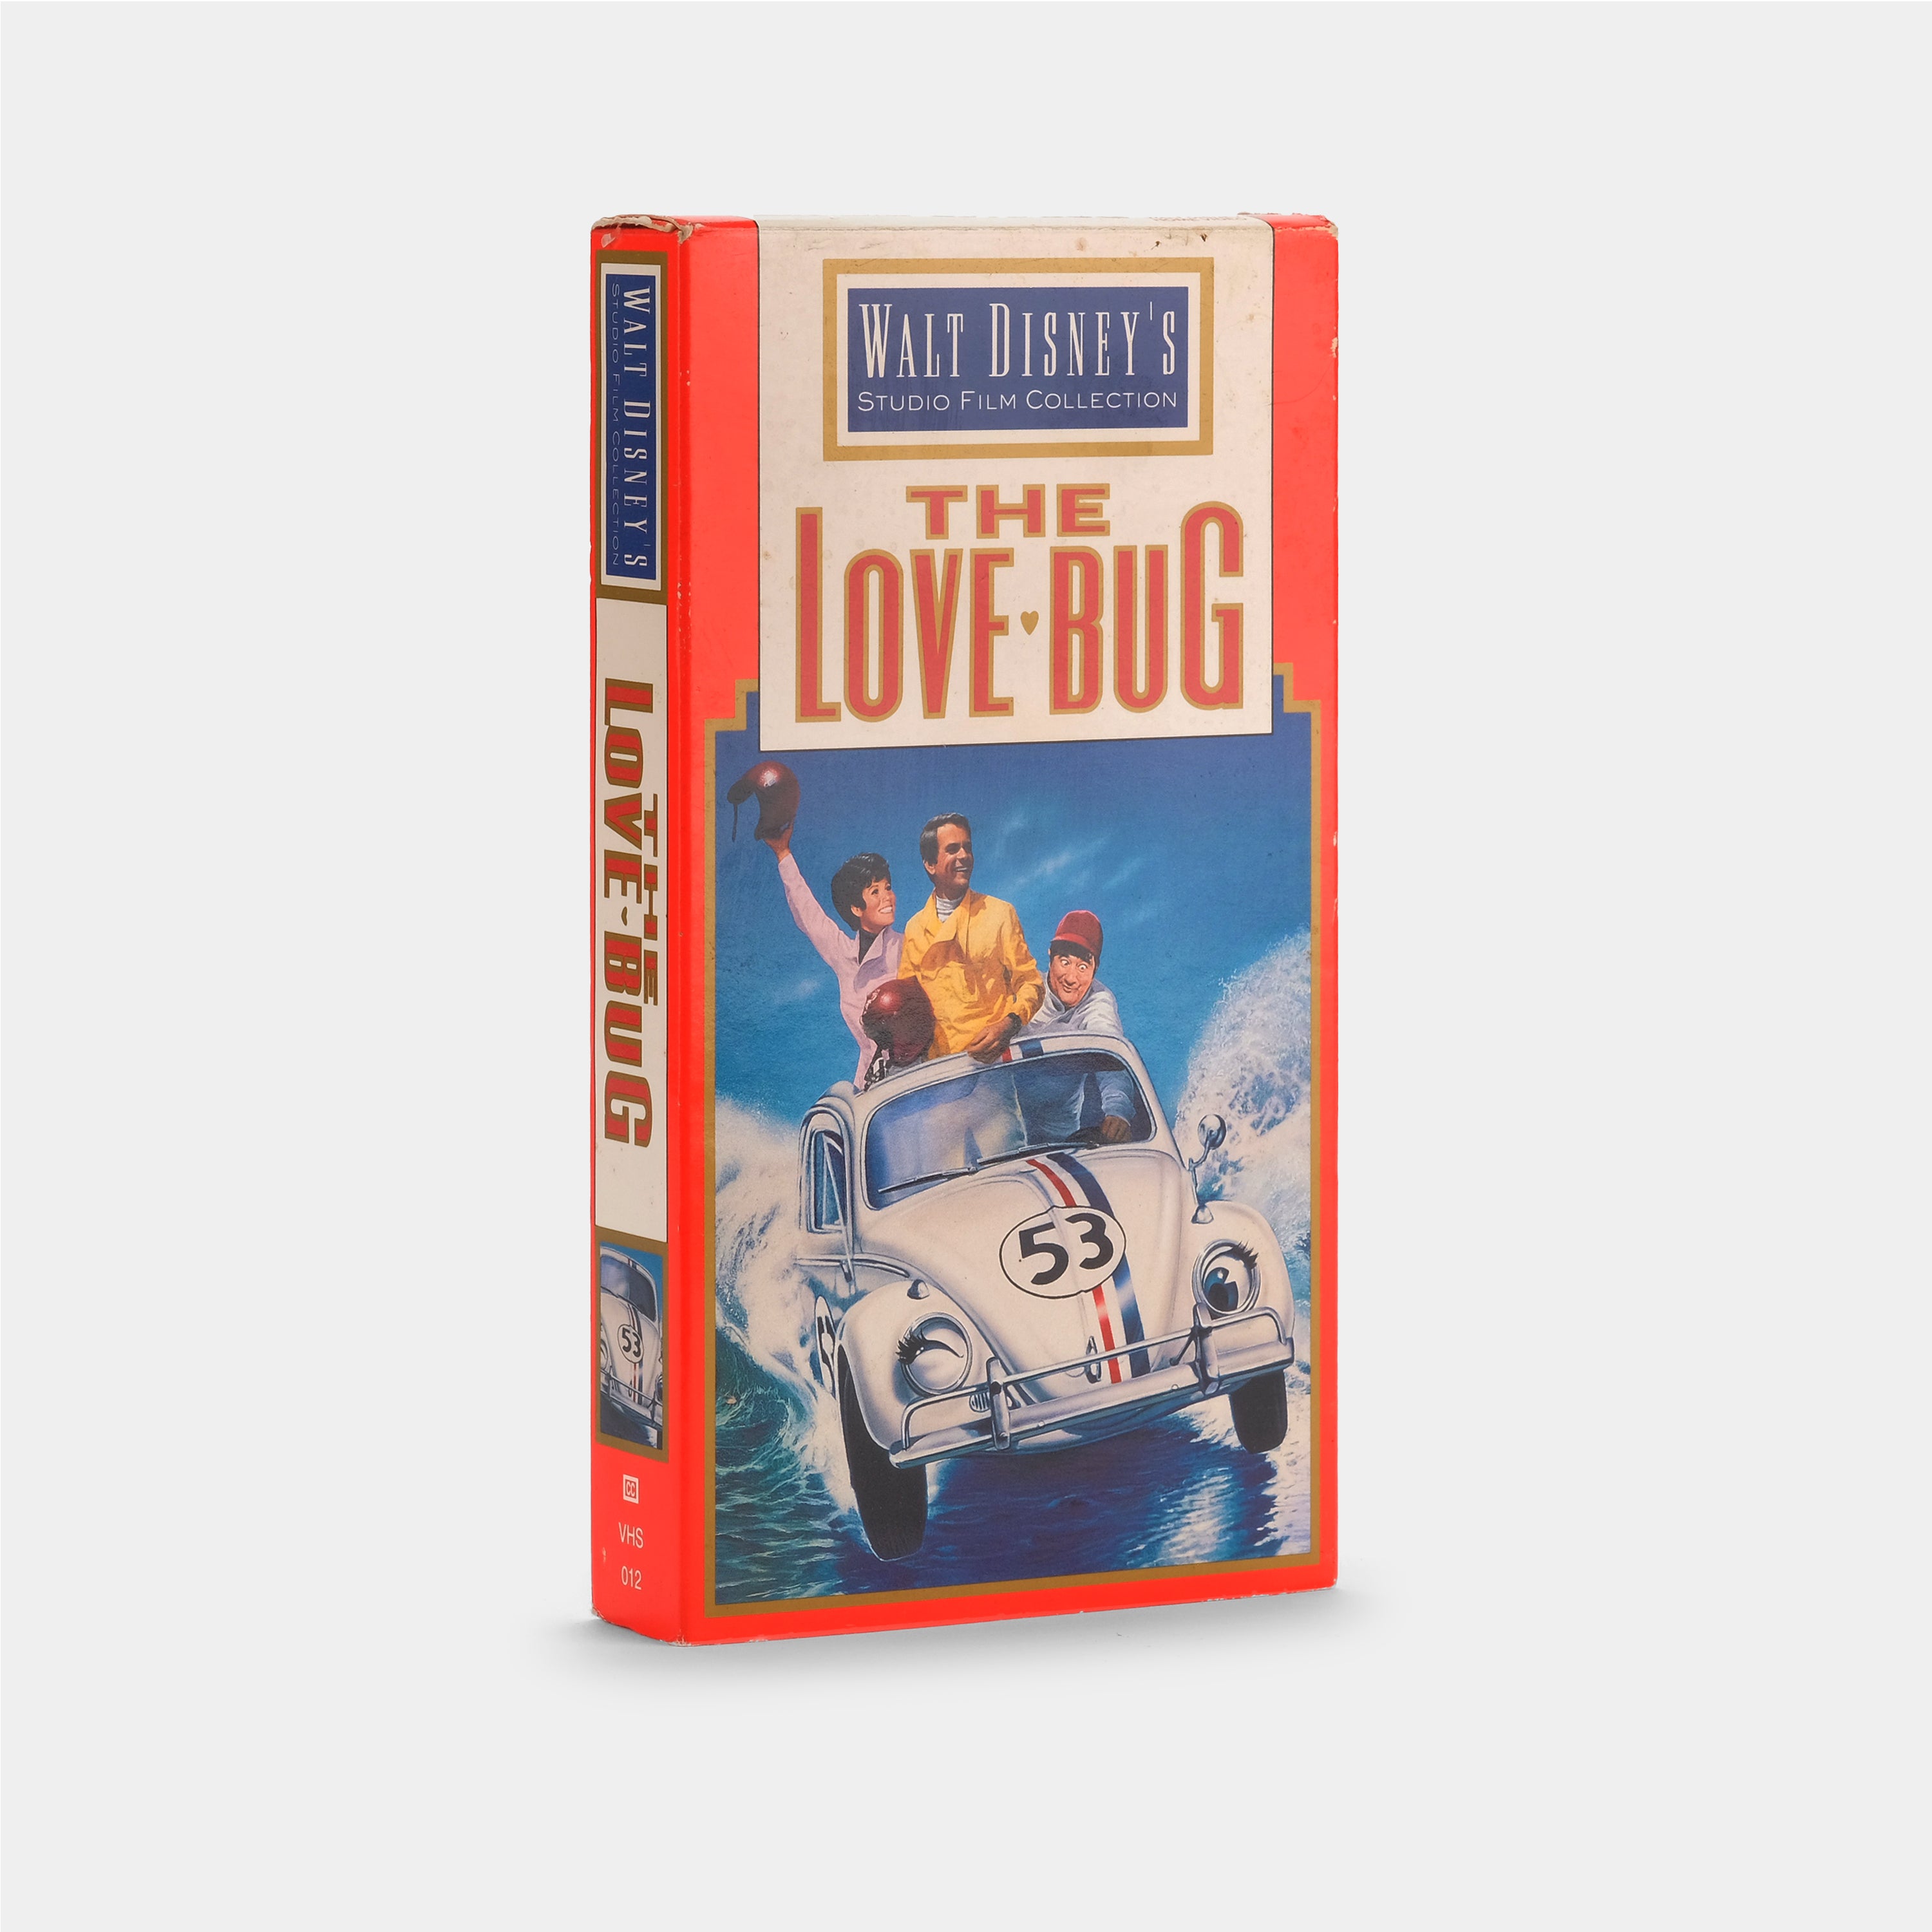 The Love Bug VHS Tape